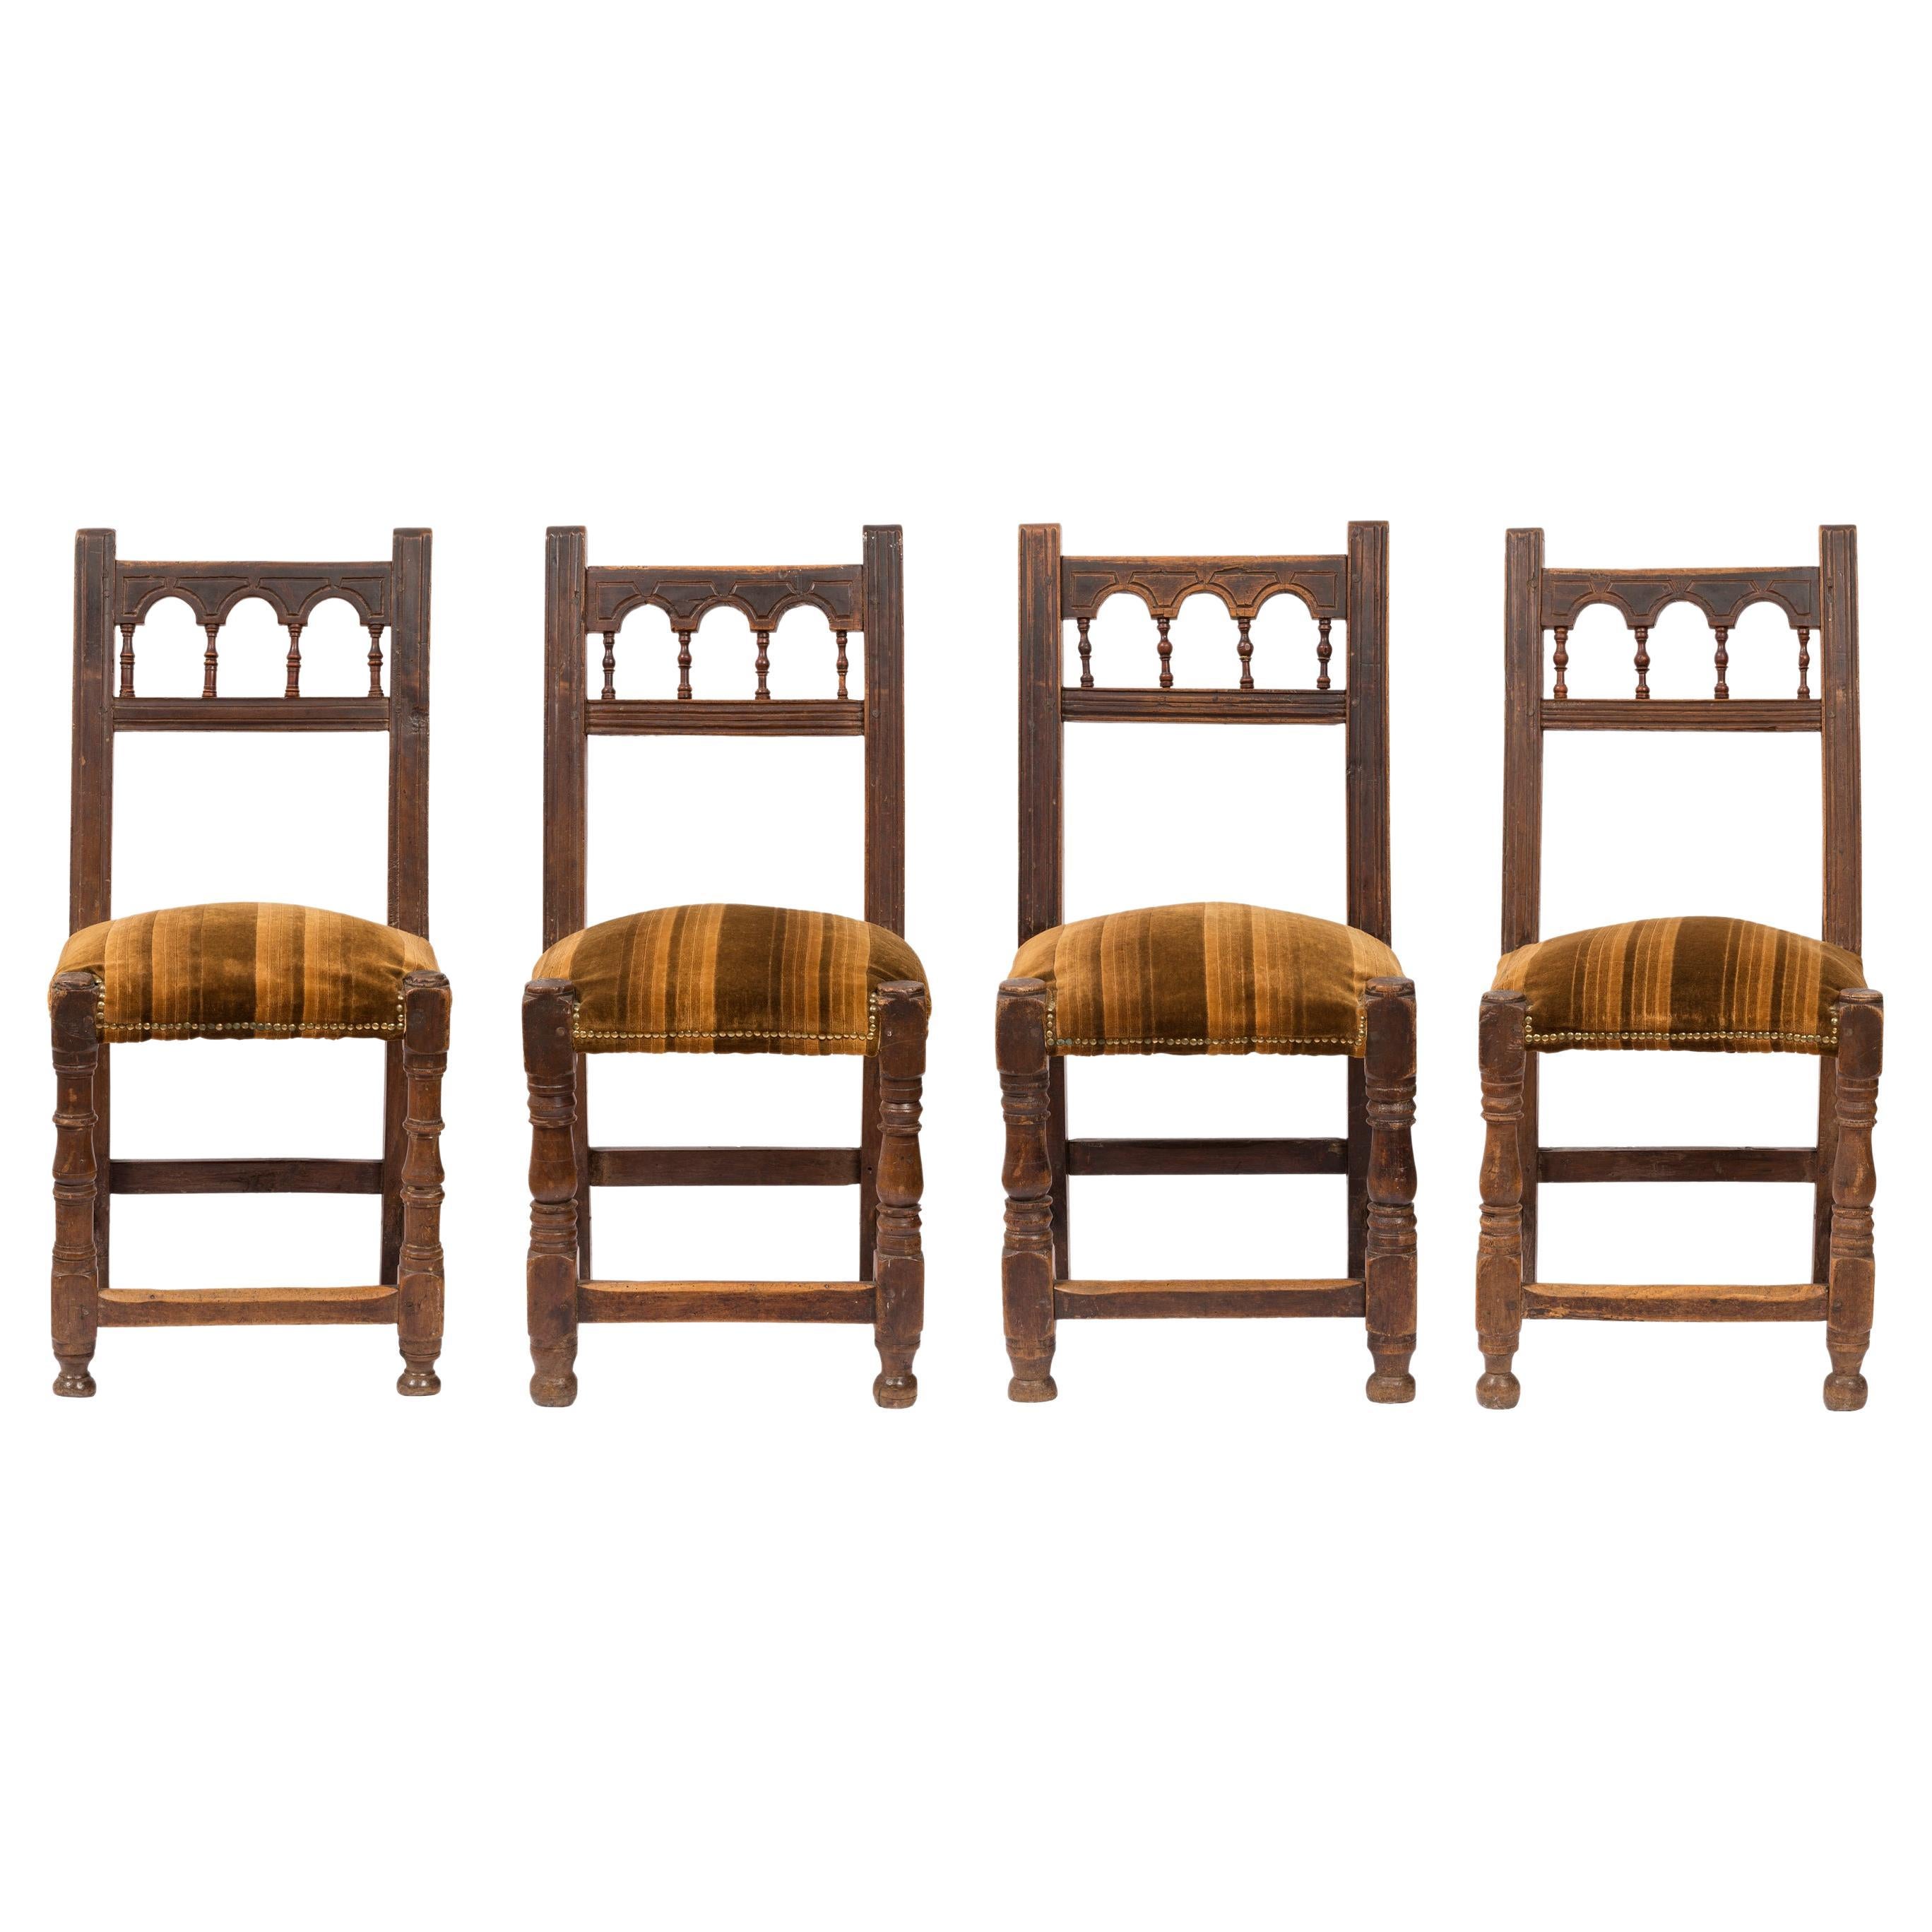 Set of Antique Handmade, Upholstered Rustic Wood Chairs from Northern Spain